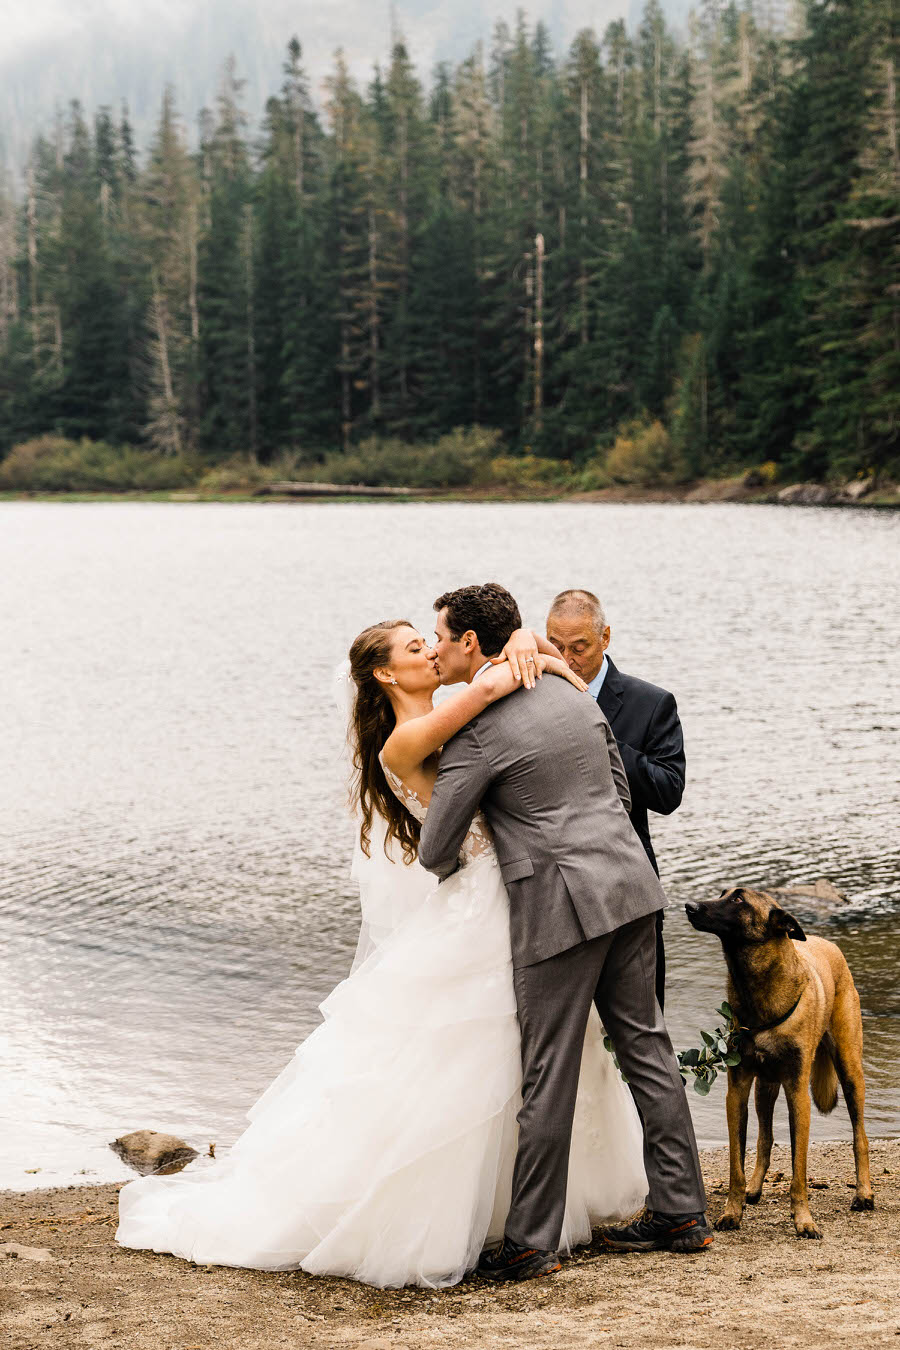 A bride and groom share their first kiss during their hiking elopement ceremony in the Washington Cascades